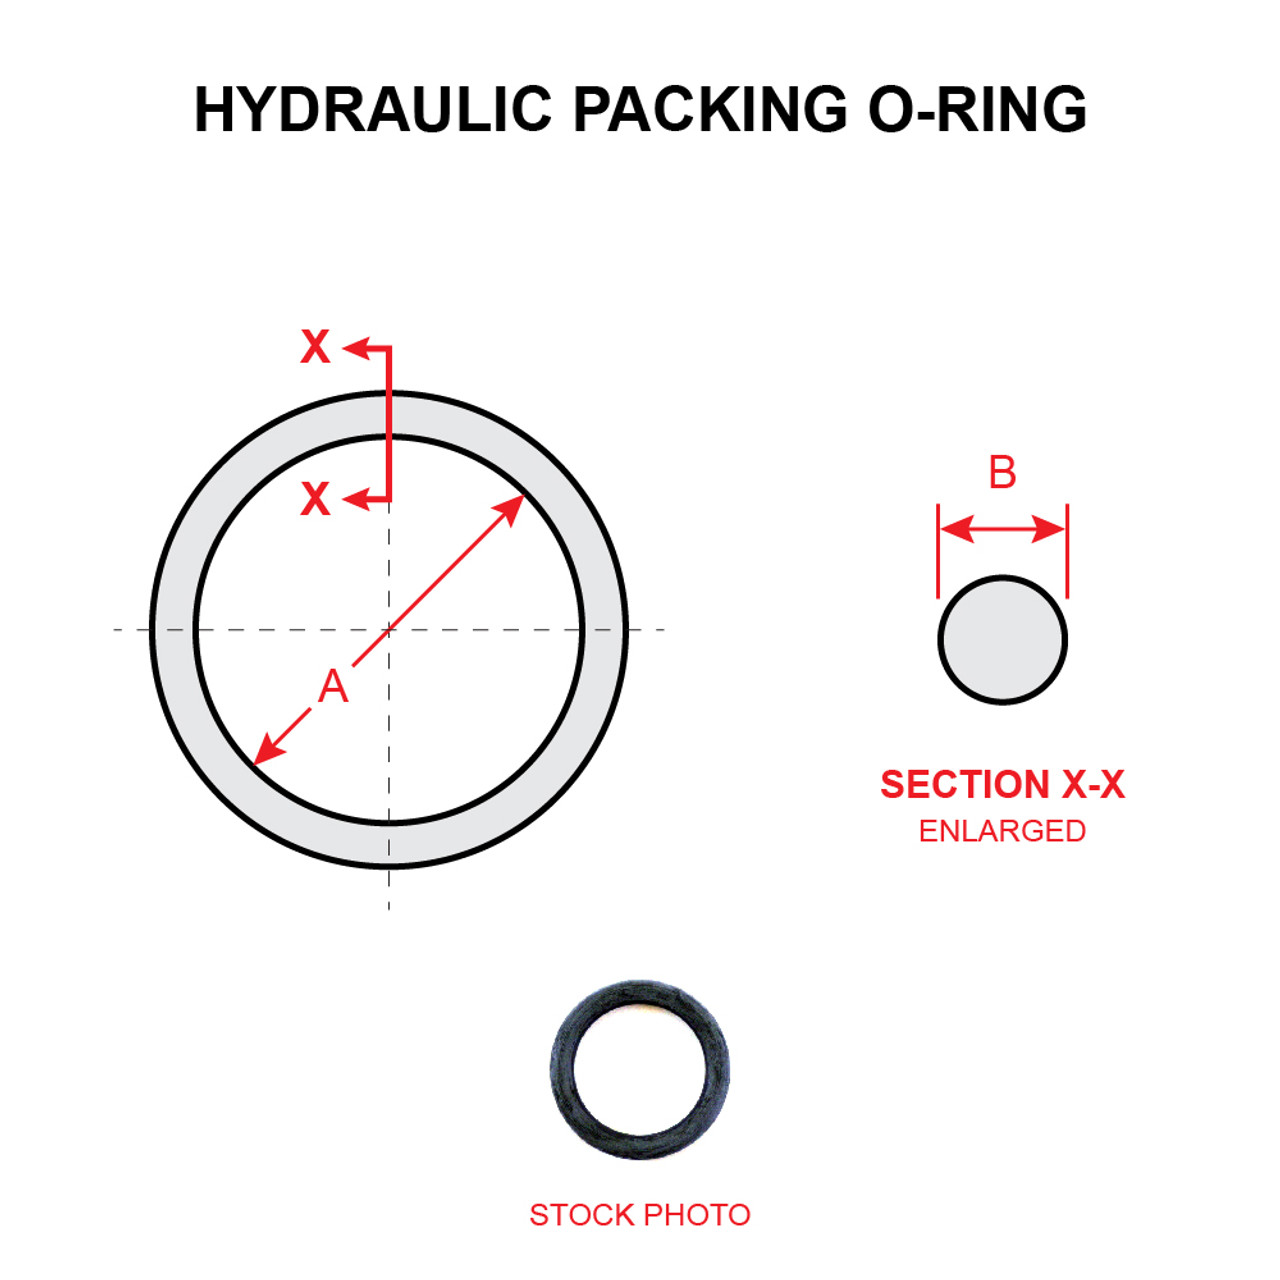 MS28775-227   HYDRAULIC PACKING O-RING